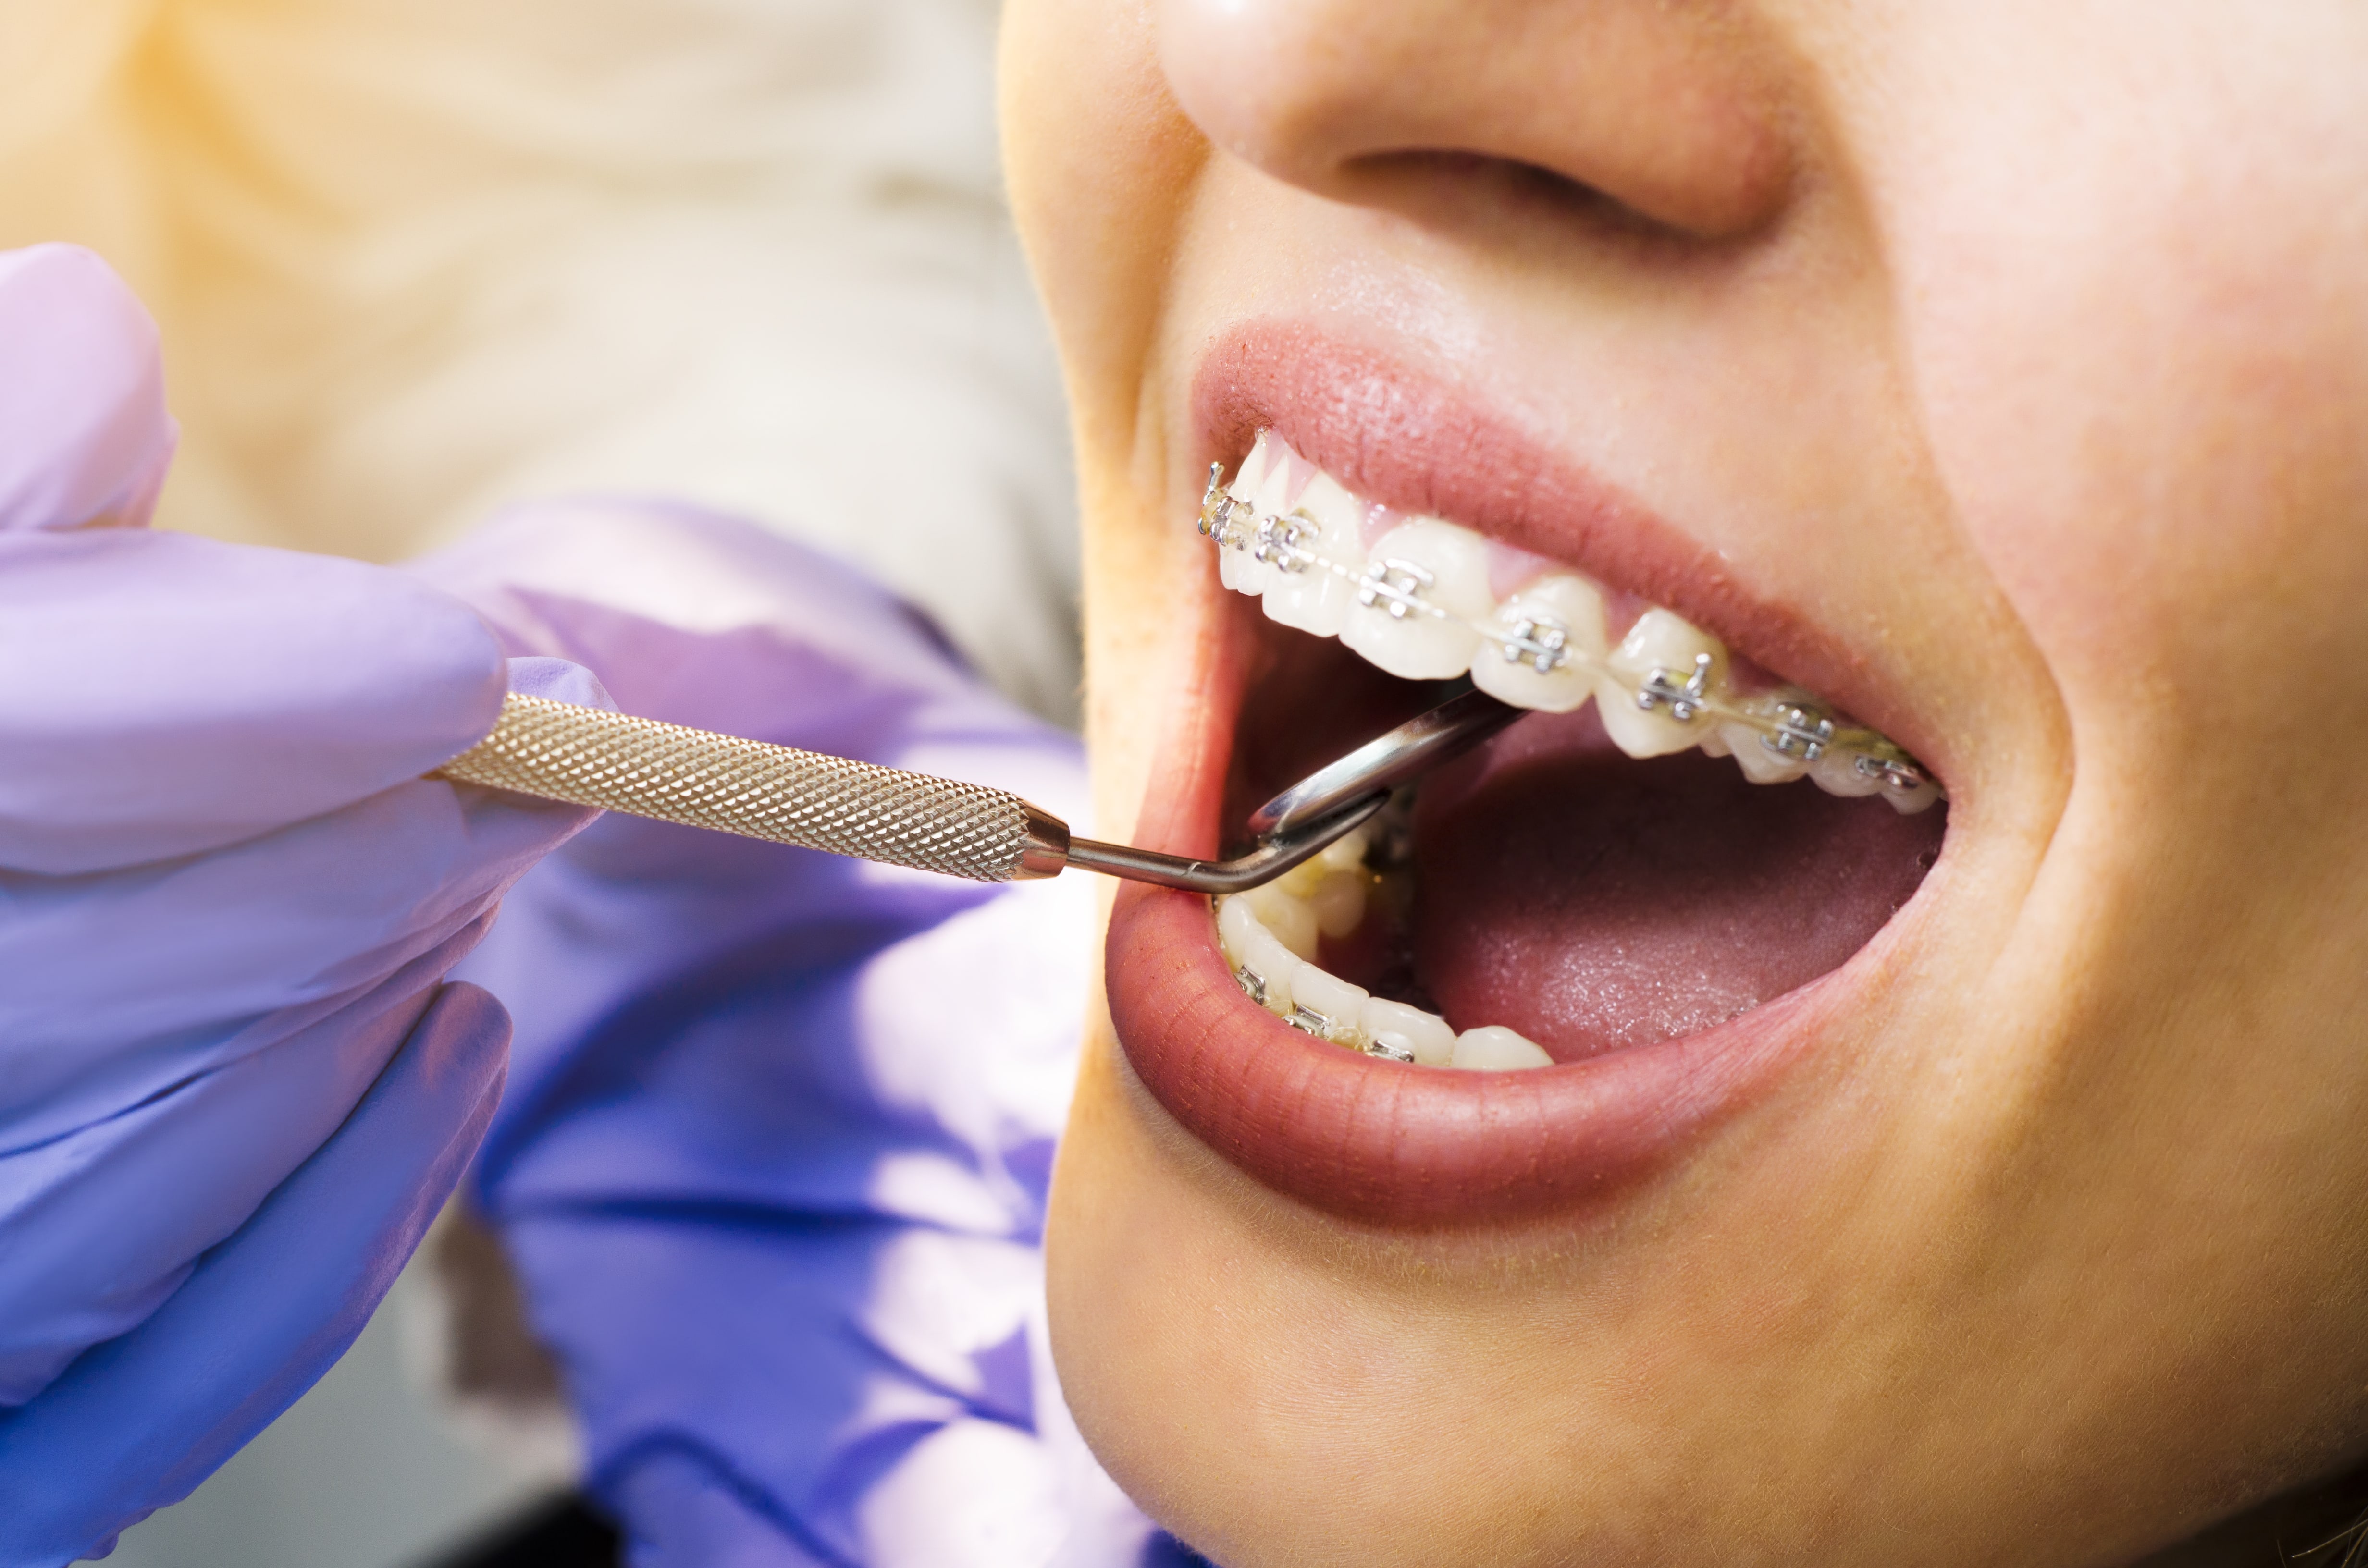 Dental Braces Treatment Details Removal Recovery